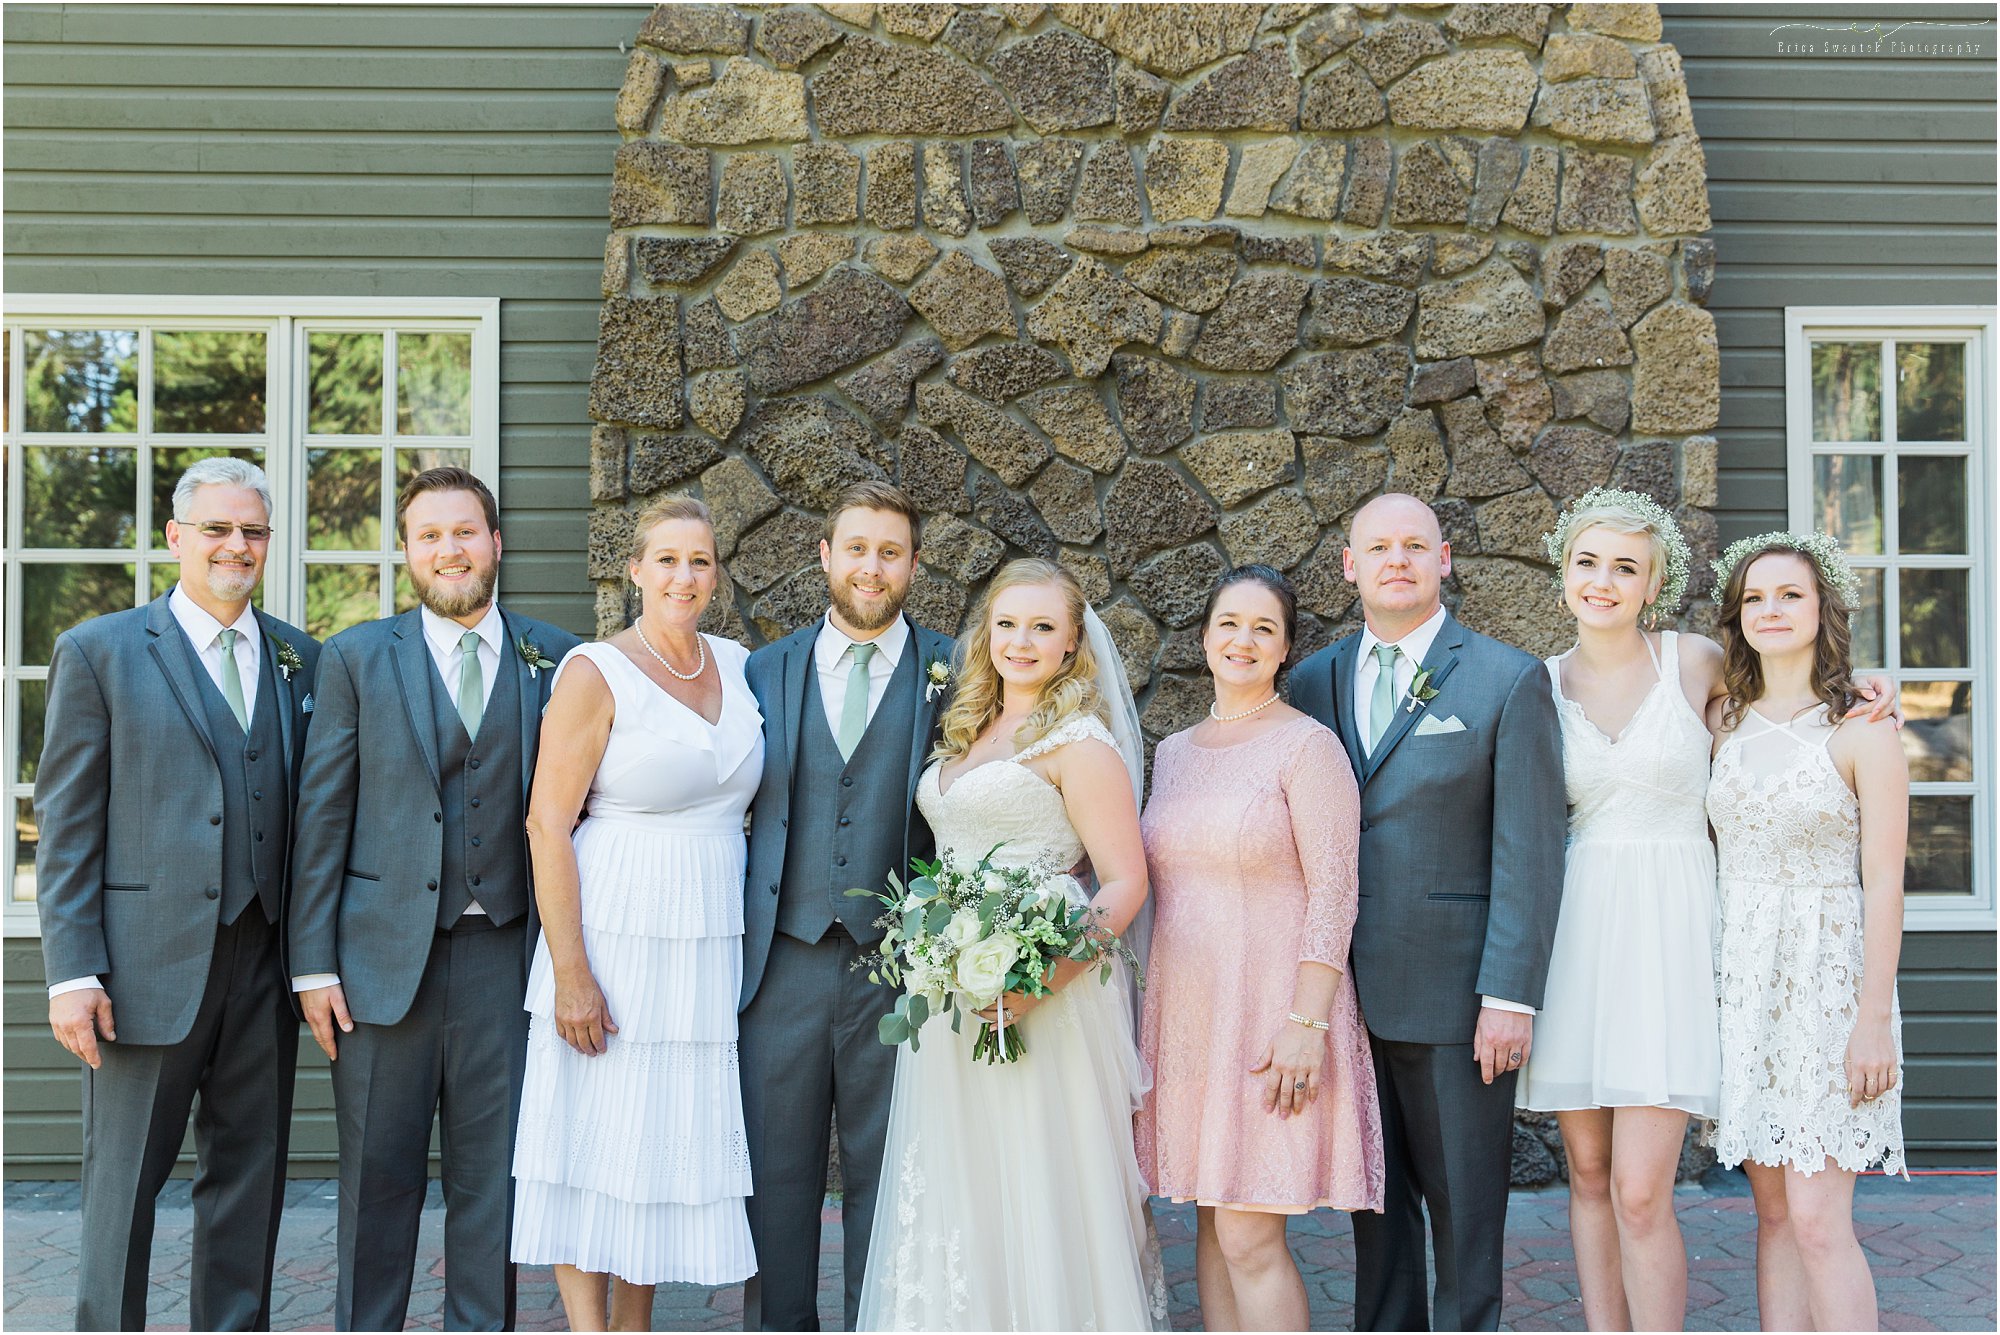 Family portraits at this Aspen Hall wedding in Bend, OR. | Erica Swantek Photography